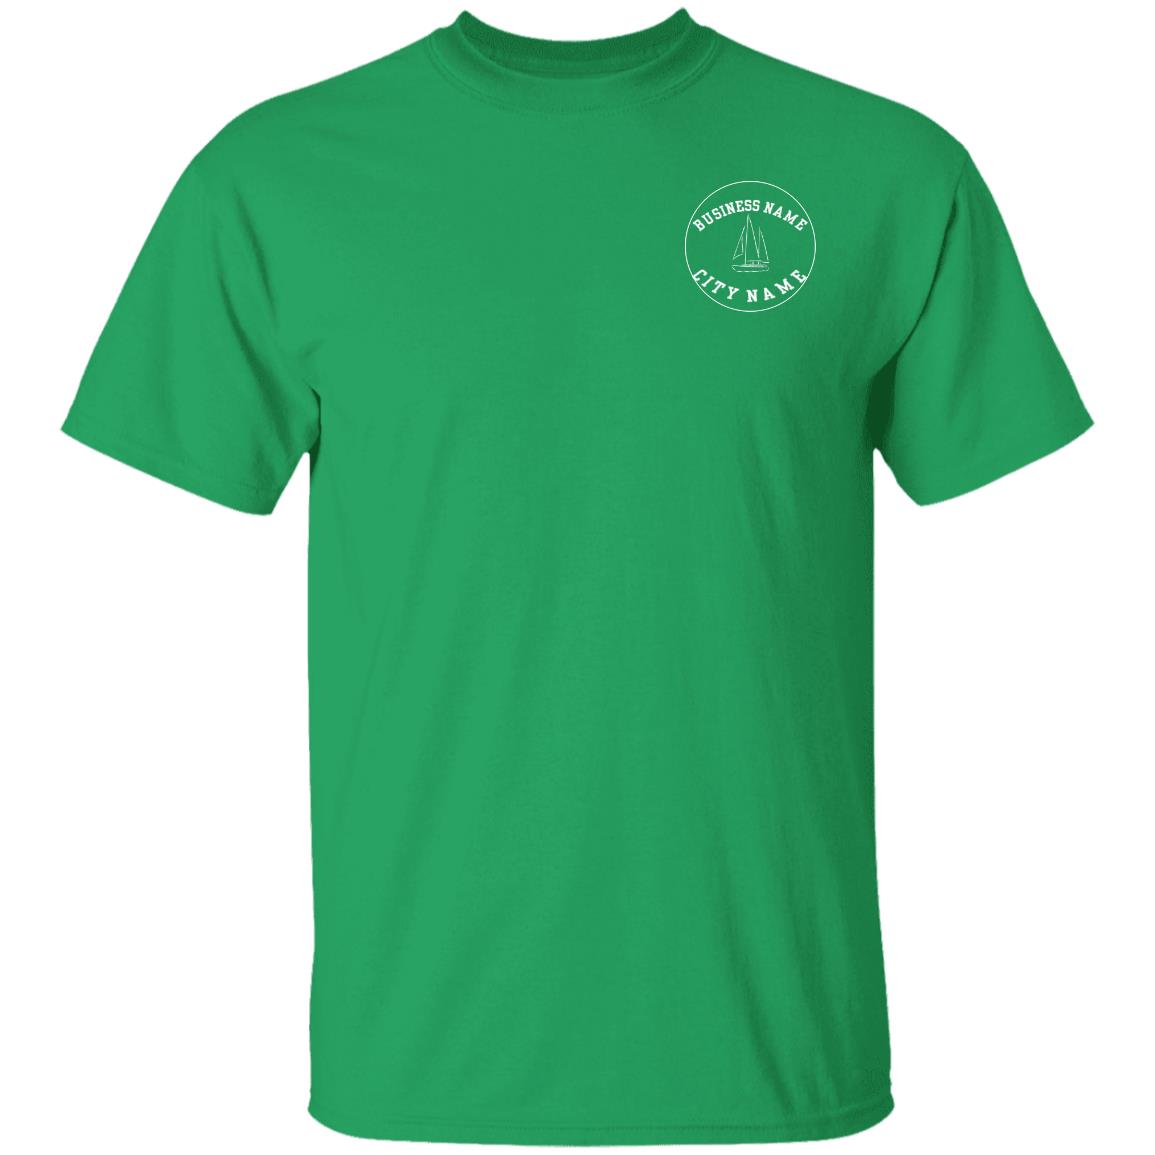 Tee shirts for staff, promo or yourself - View Now - OZ wide